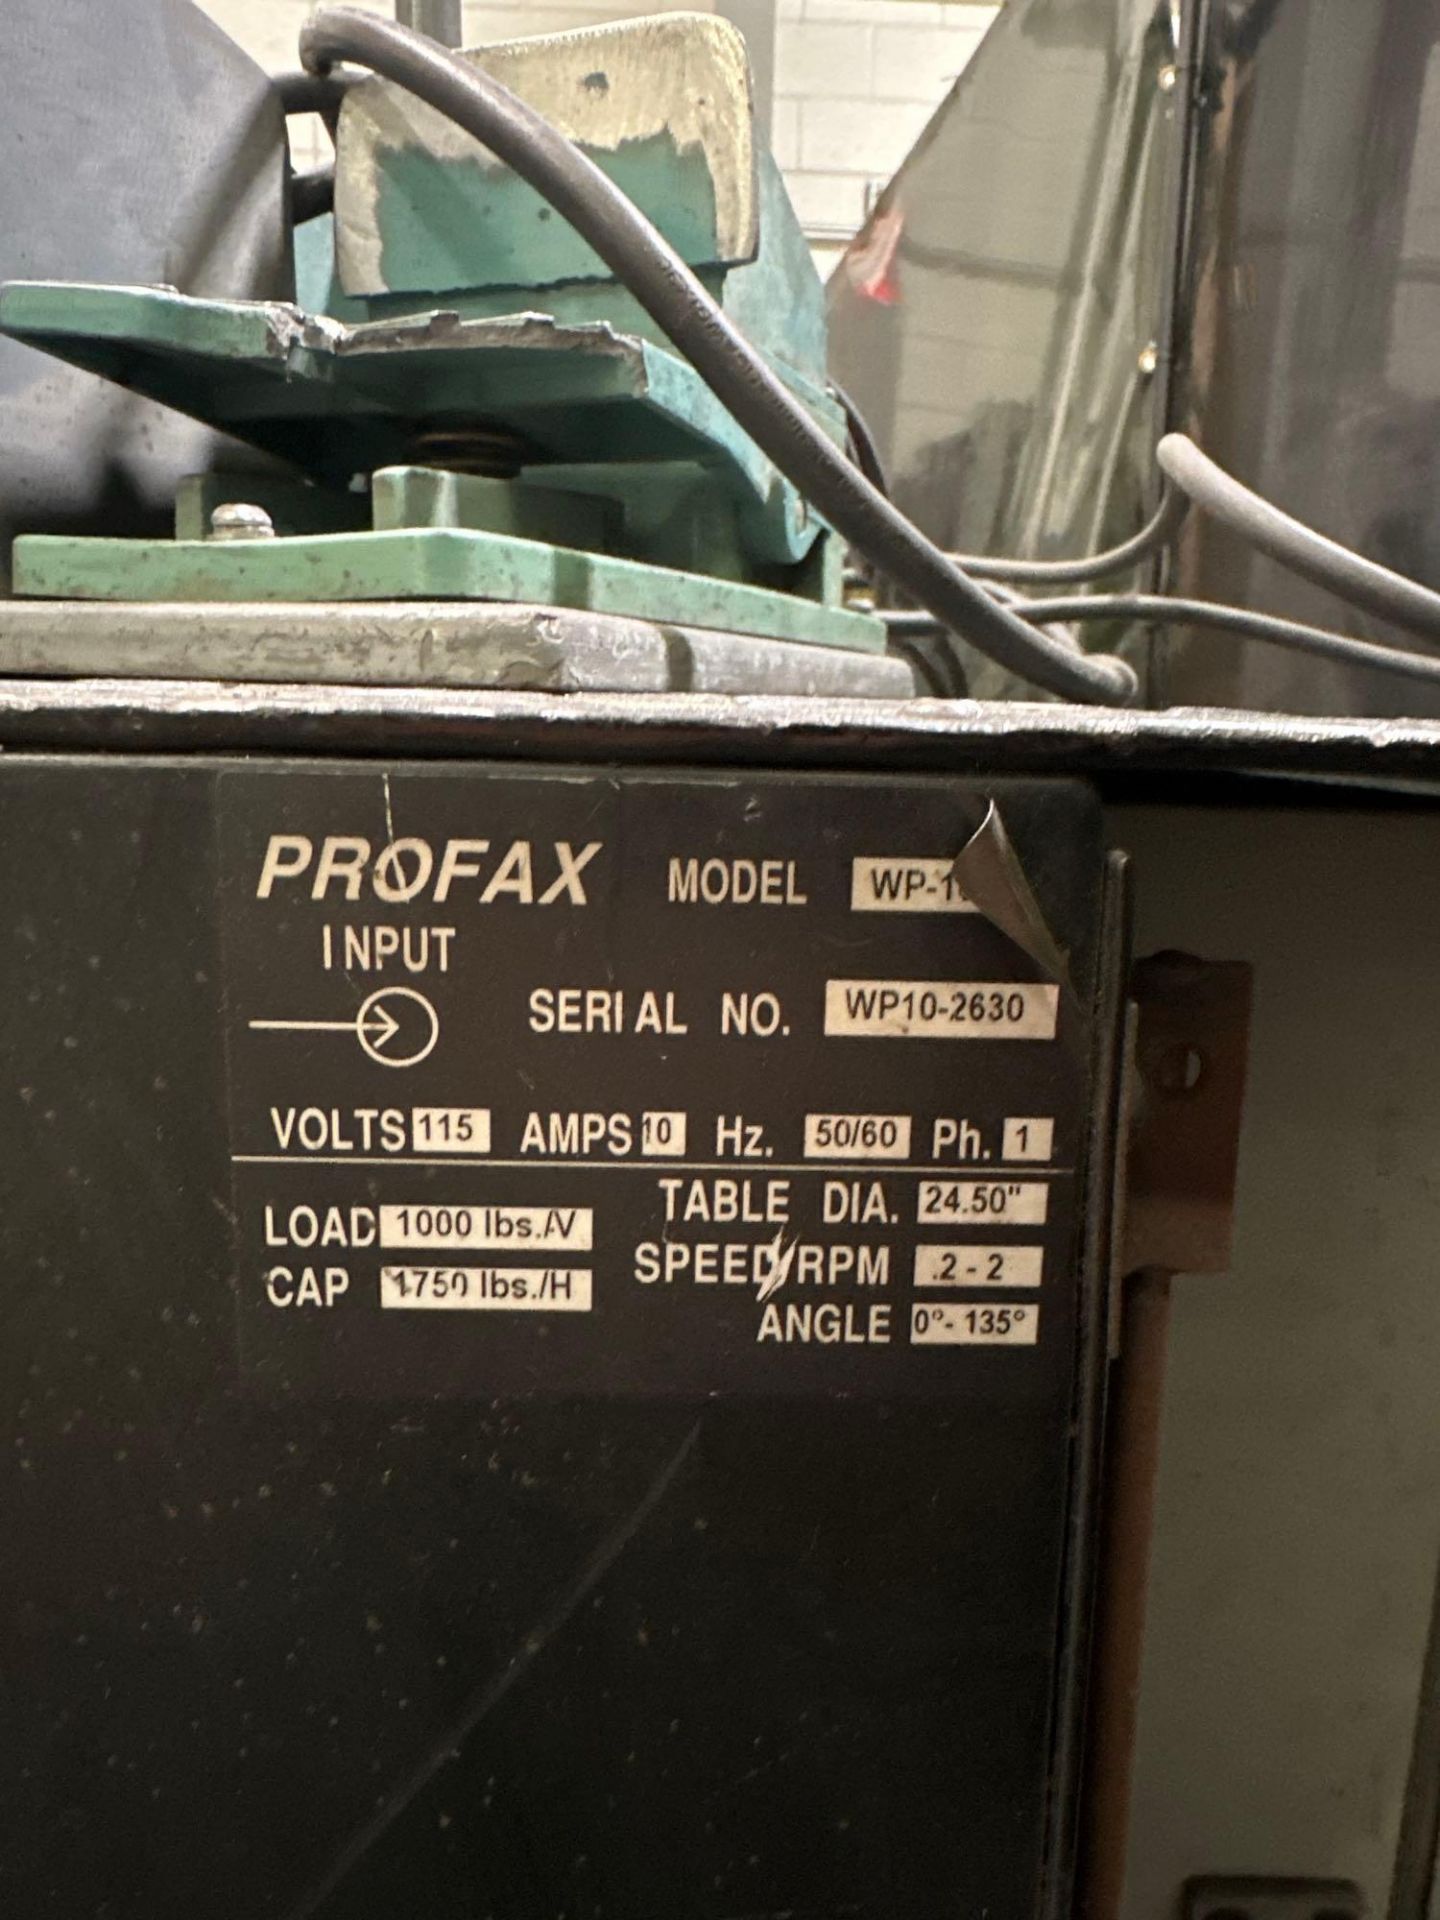 Profax WP-1000 Welding Postioner. 25.5” Table, 2 rpm, 1750lbs Cap, 0-135 Angle, s/n wp10 - 2630 - Image 7 of 7